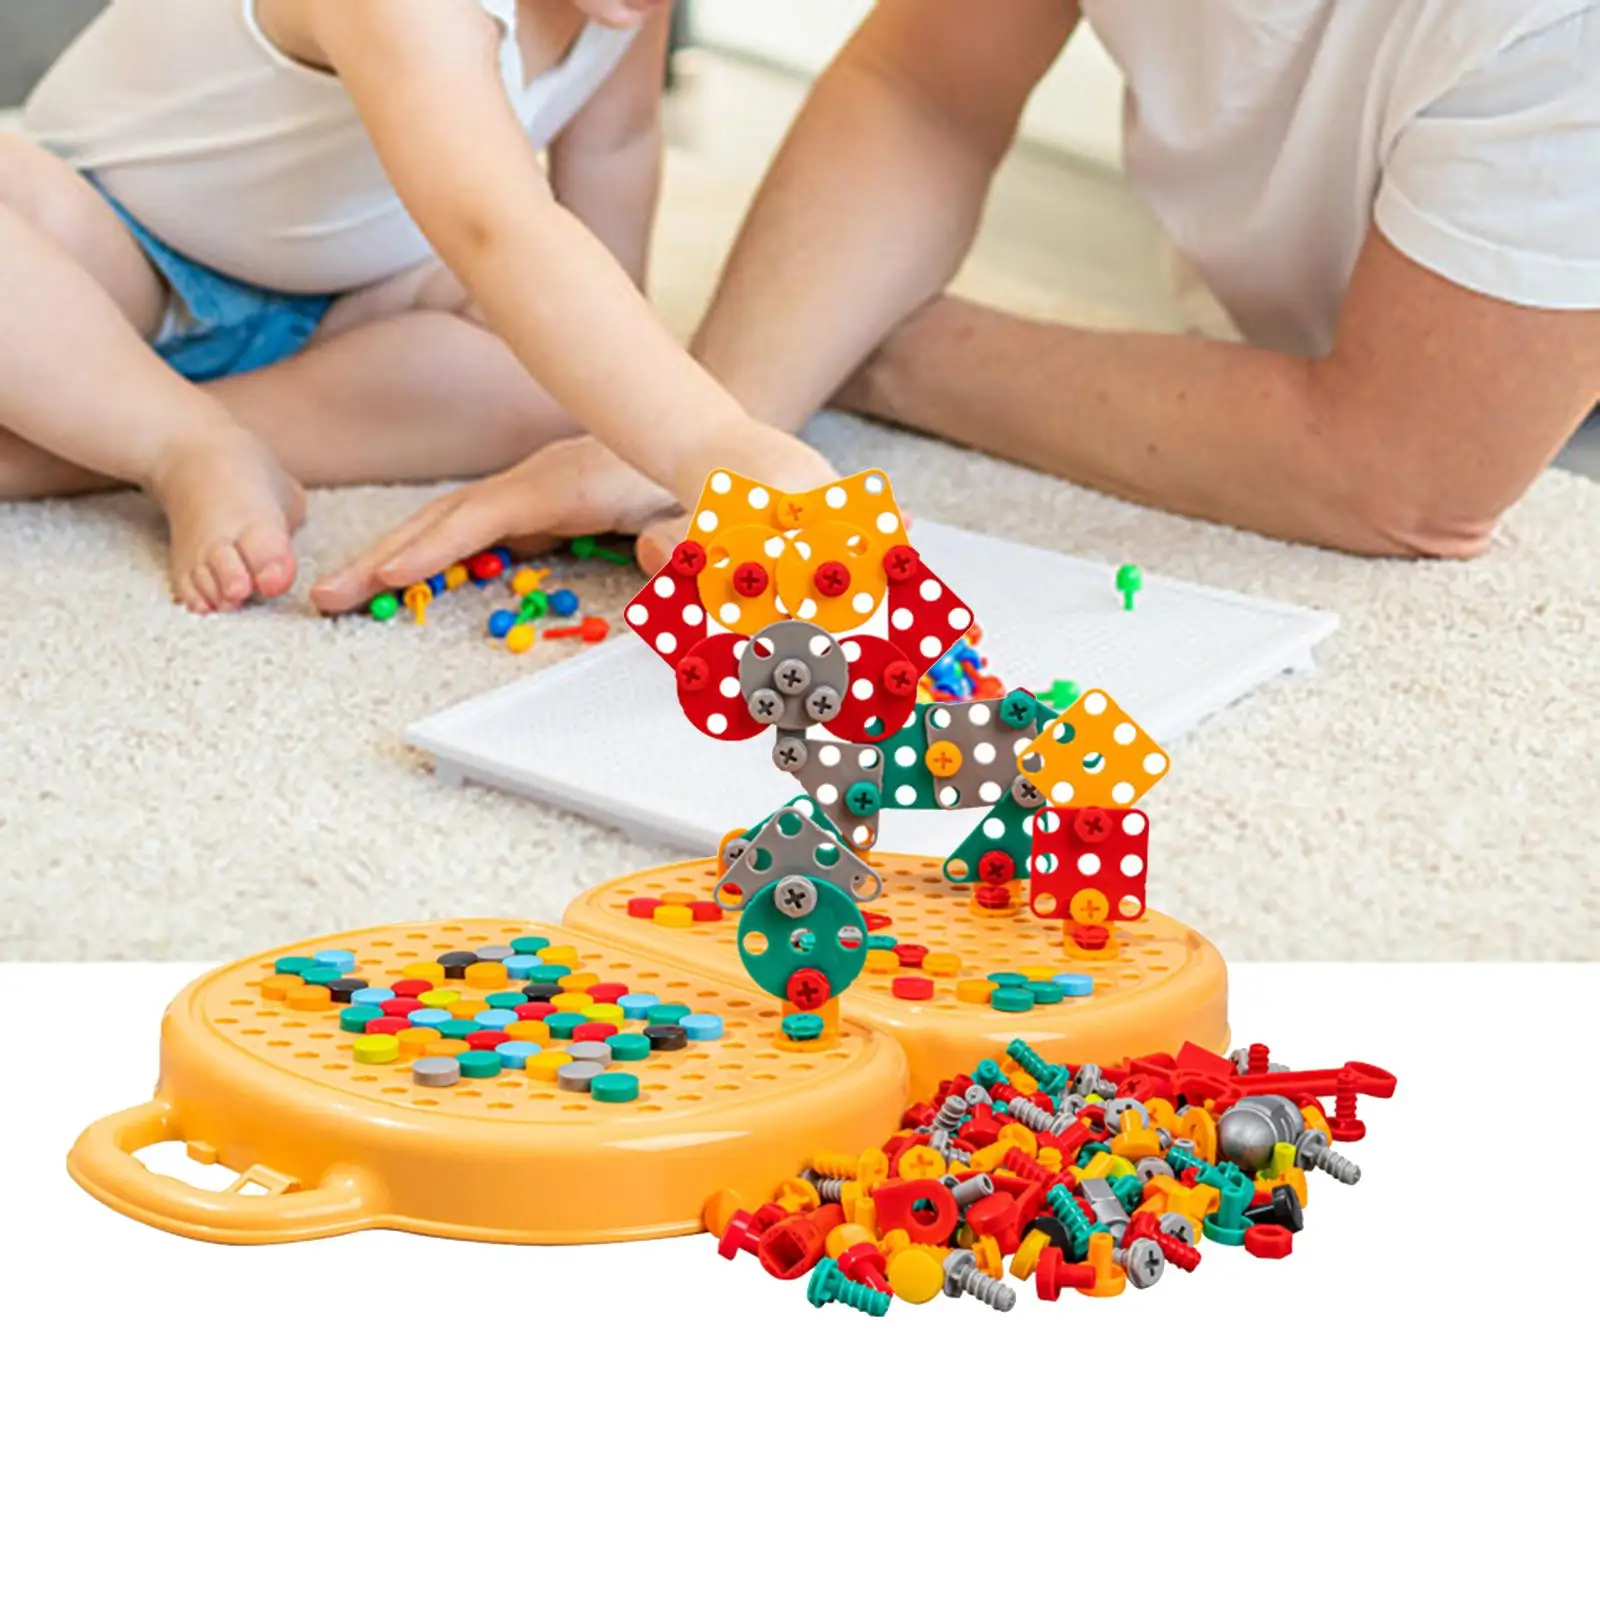 Simulation Building Toys Puzzle Toys Block Building Set Fun Activity Center DIY Assembly Screw Toy Learn Toolbox for Boys Girls